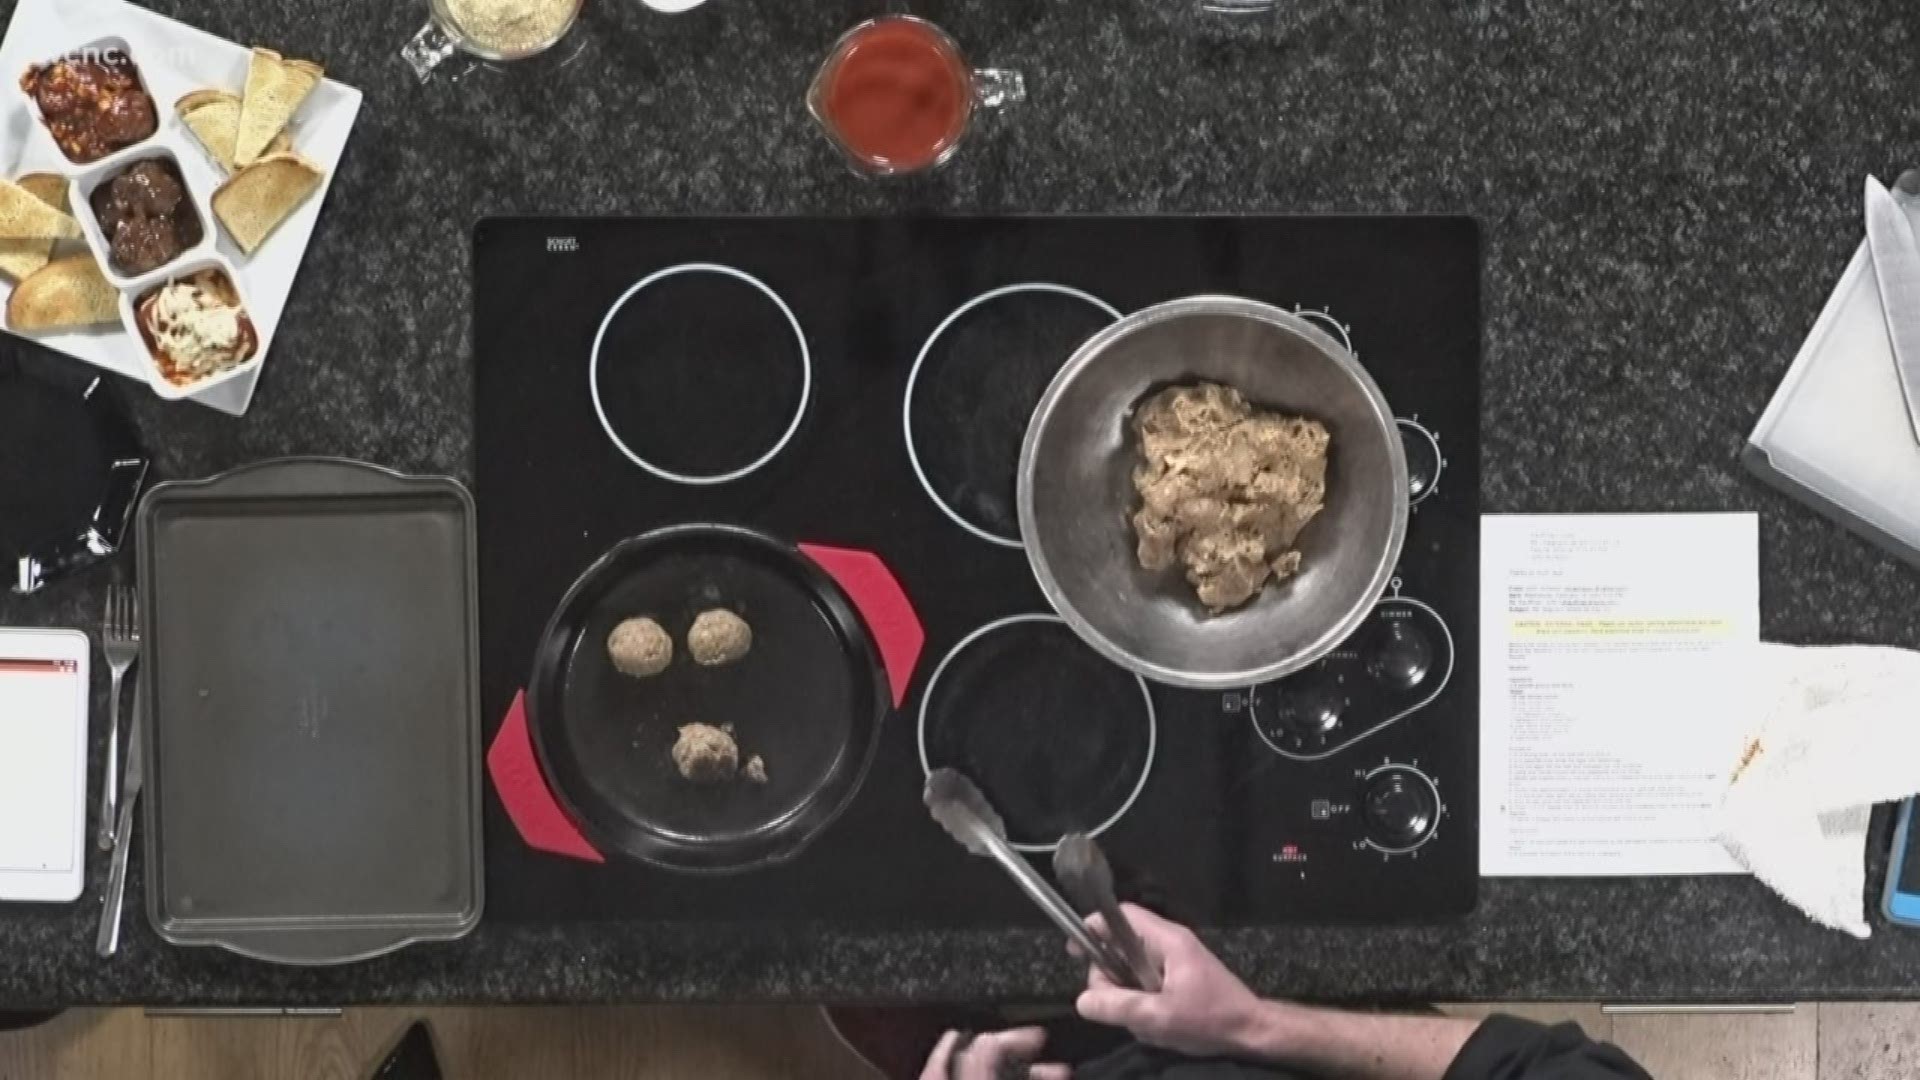 Chef Jack Acheson gives us the recipe for The Wine Loft’s delicious meatballs.